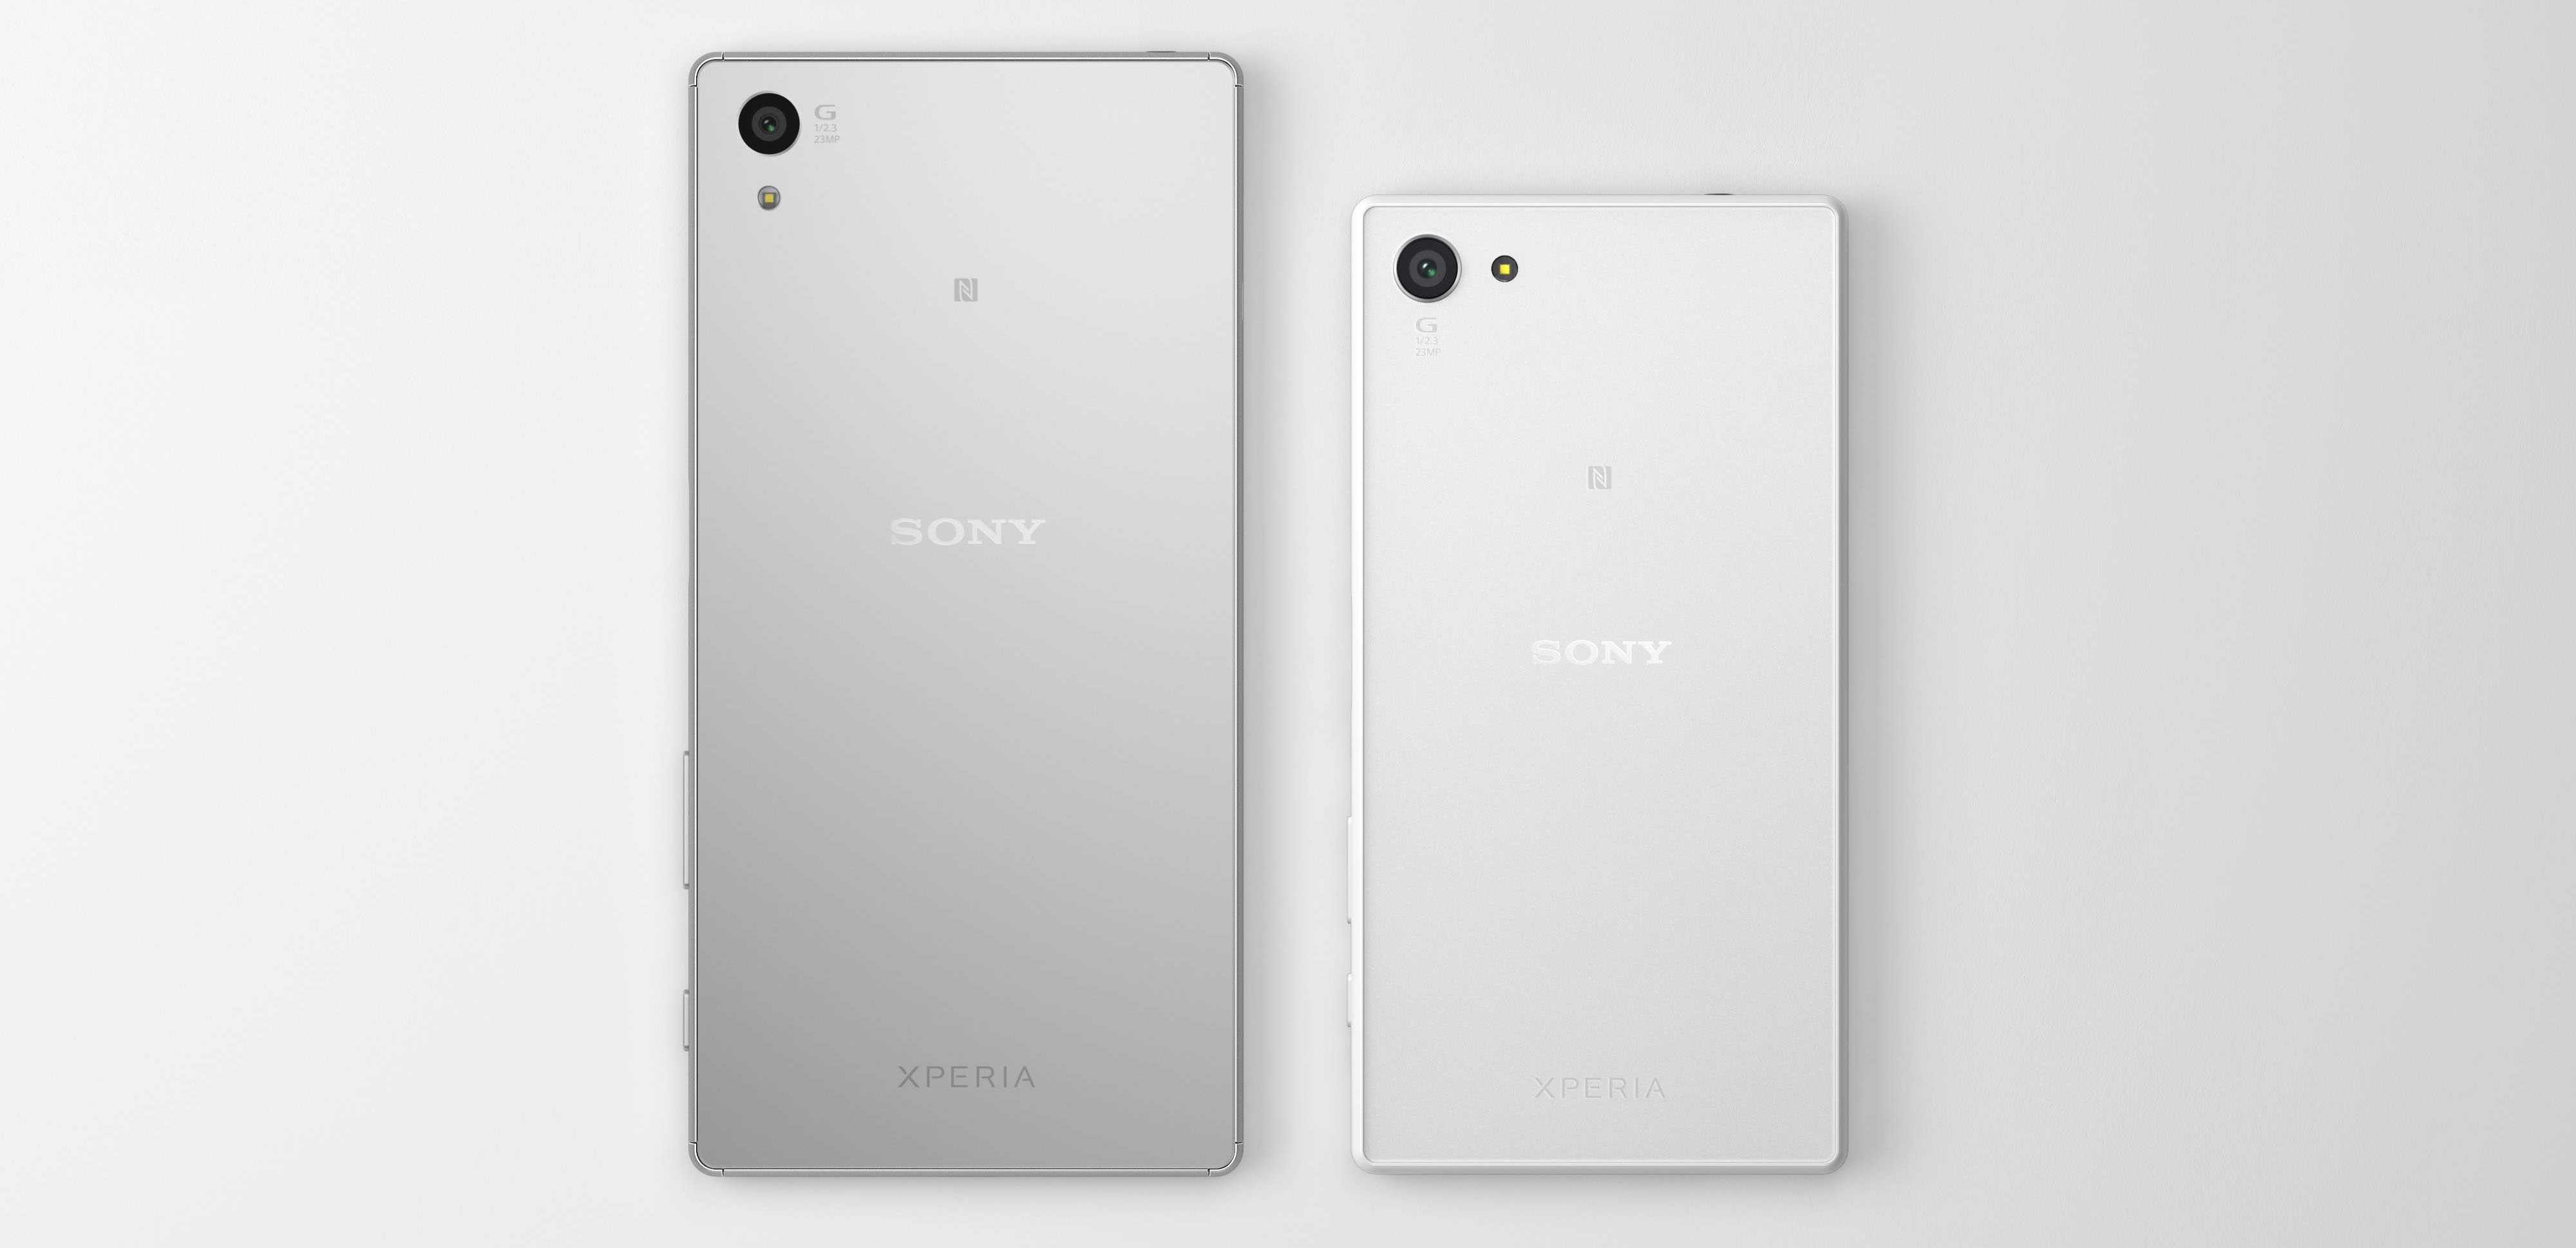 lancering Neerduwen Sloppenwijk Sony Launches The Xperia Z5, Z5 Compact, and Z5 Premium With UHD Display